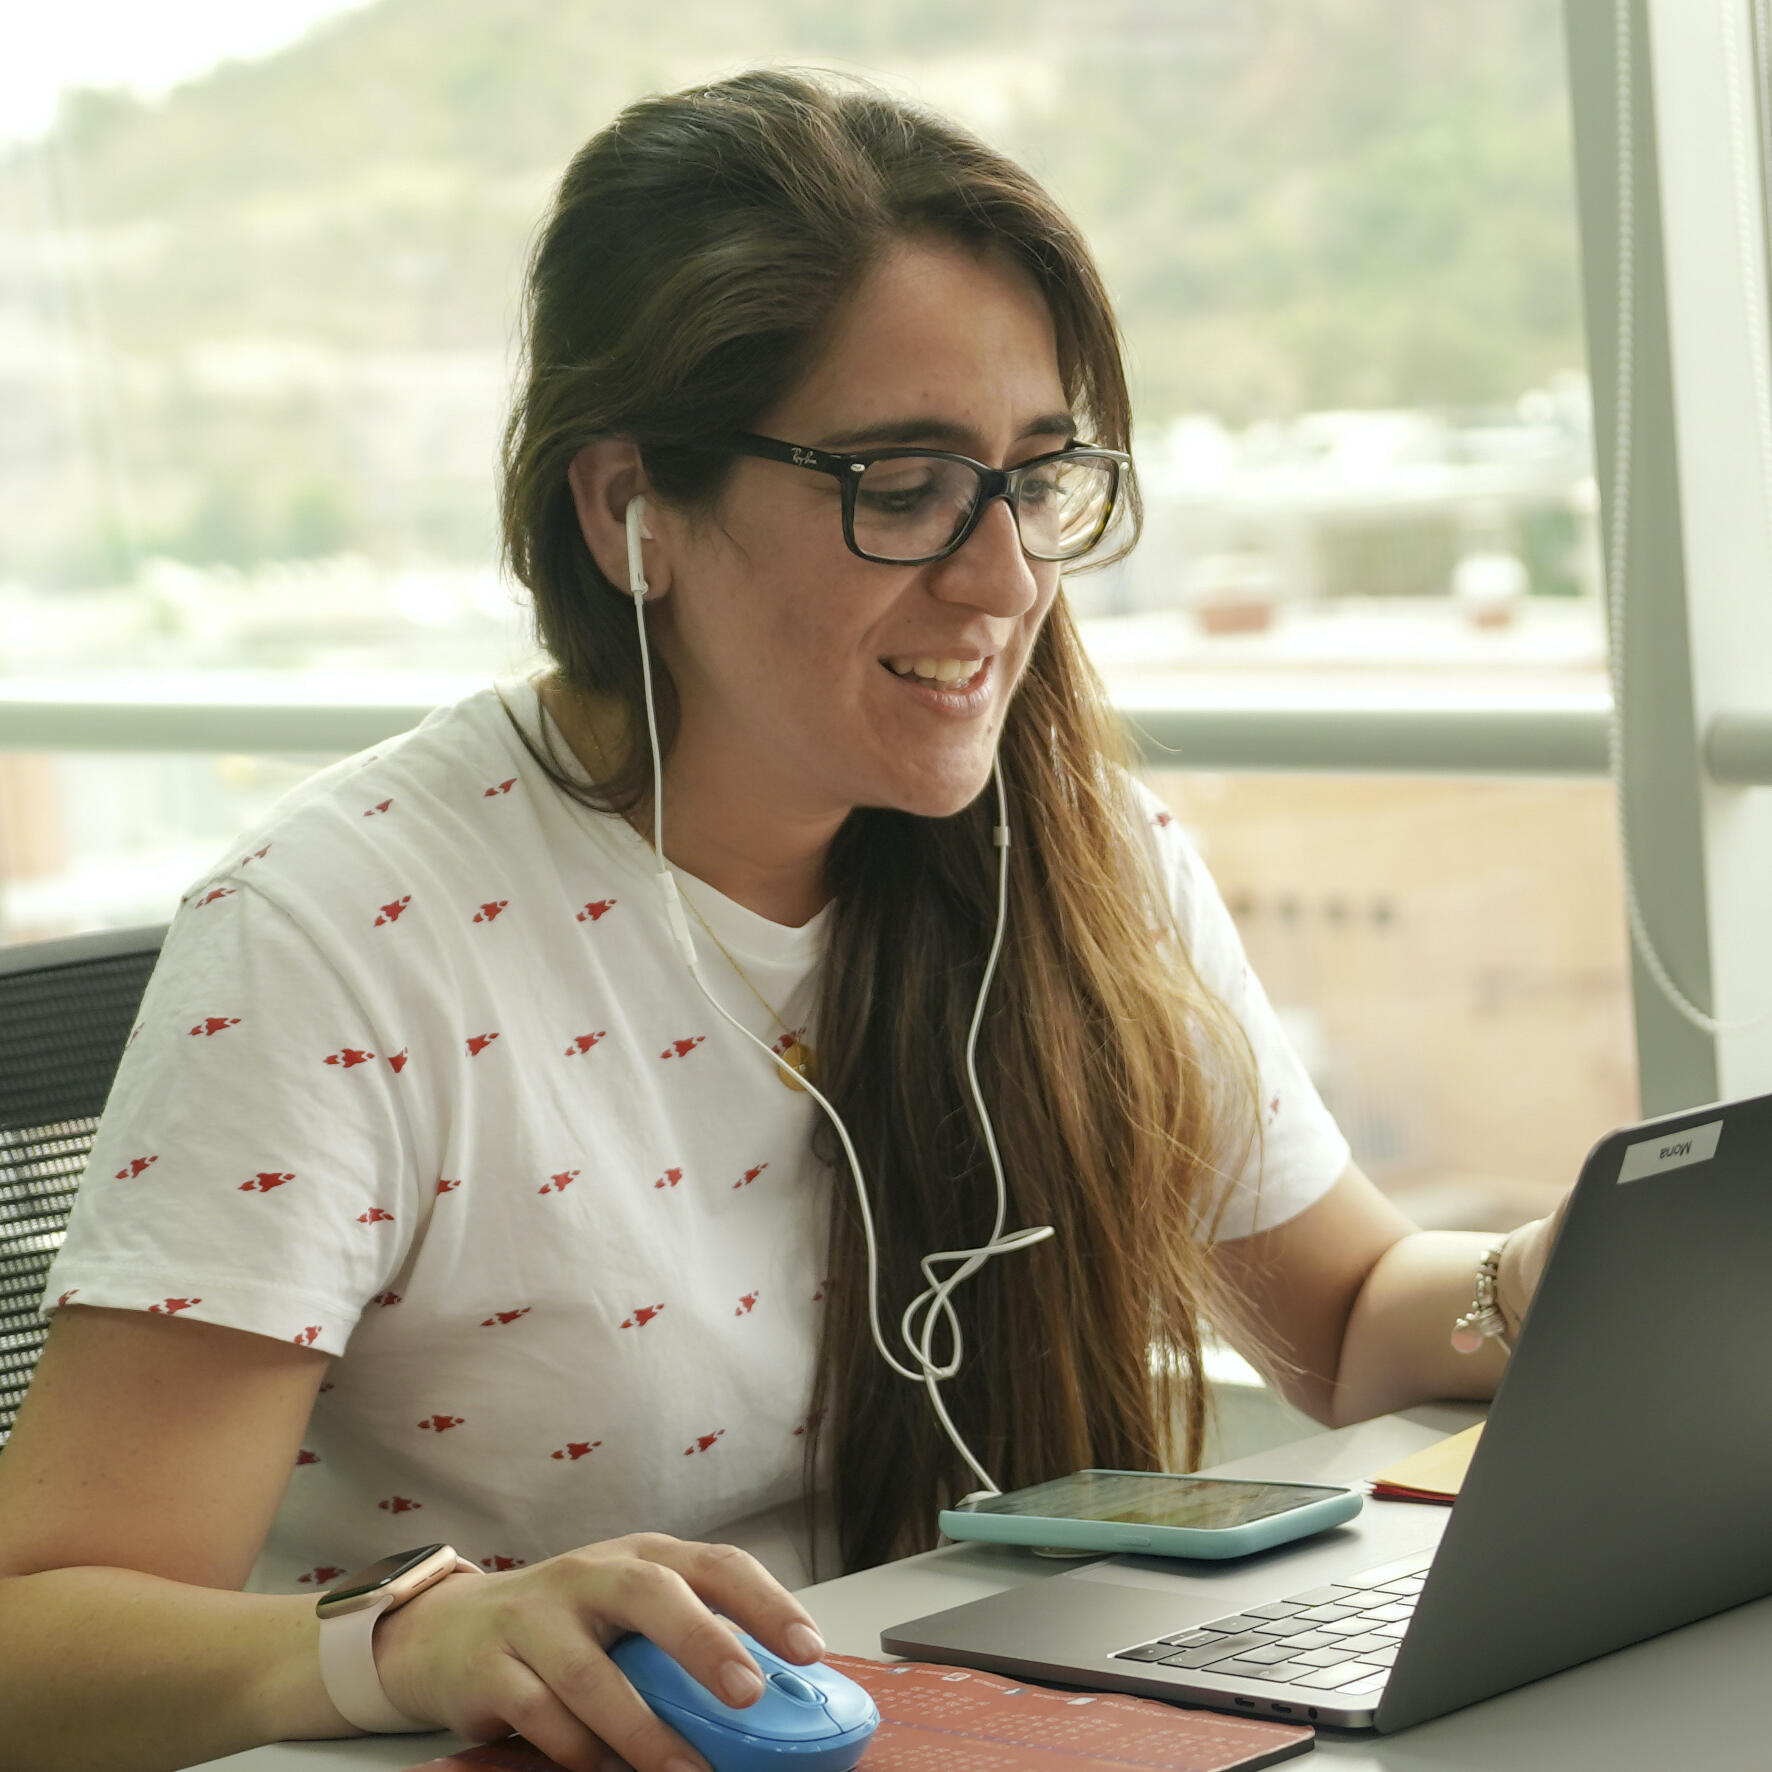 Image of a Thoughtworker in Chile working and smiling